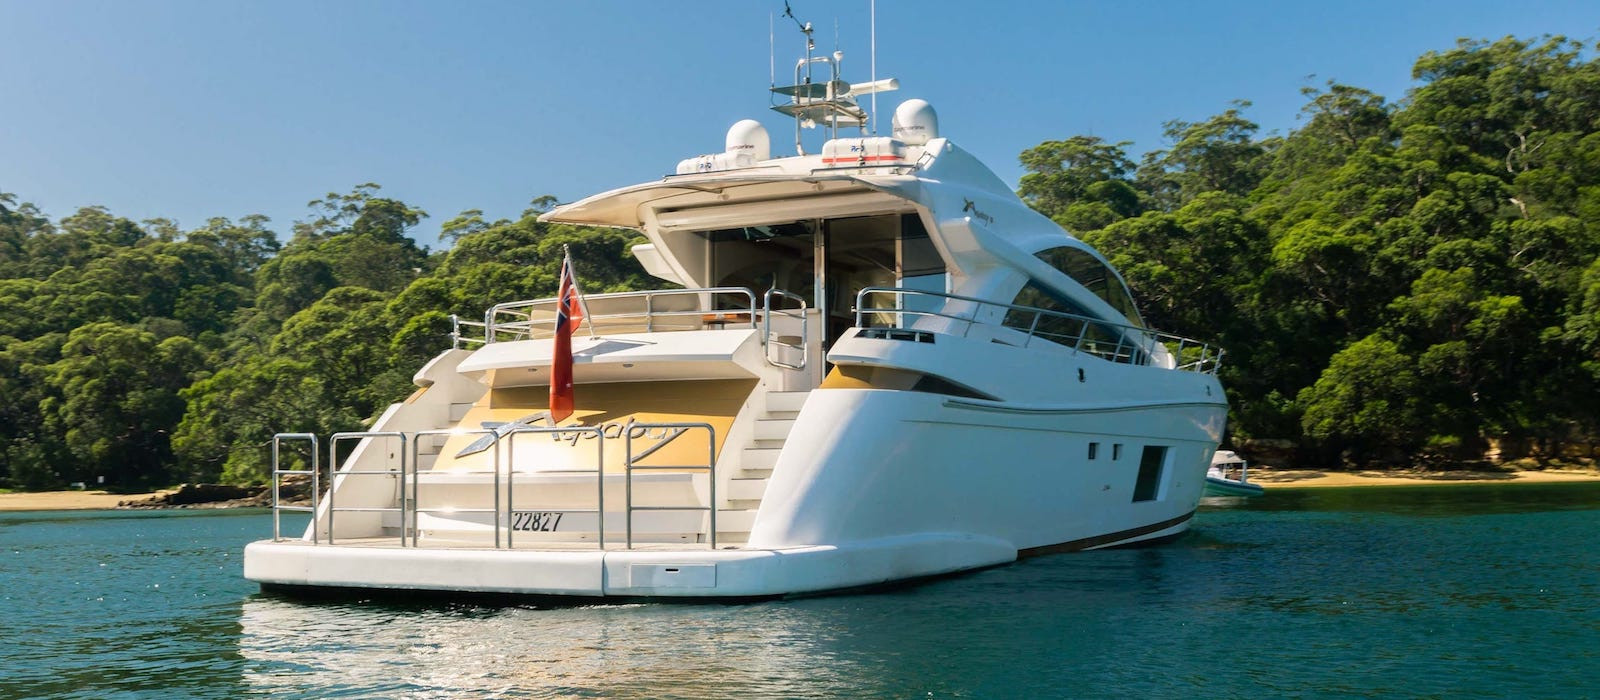 Stern view of luxury boat hire on Aquabay